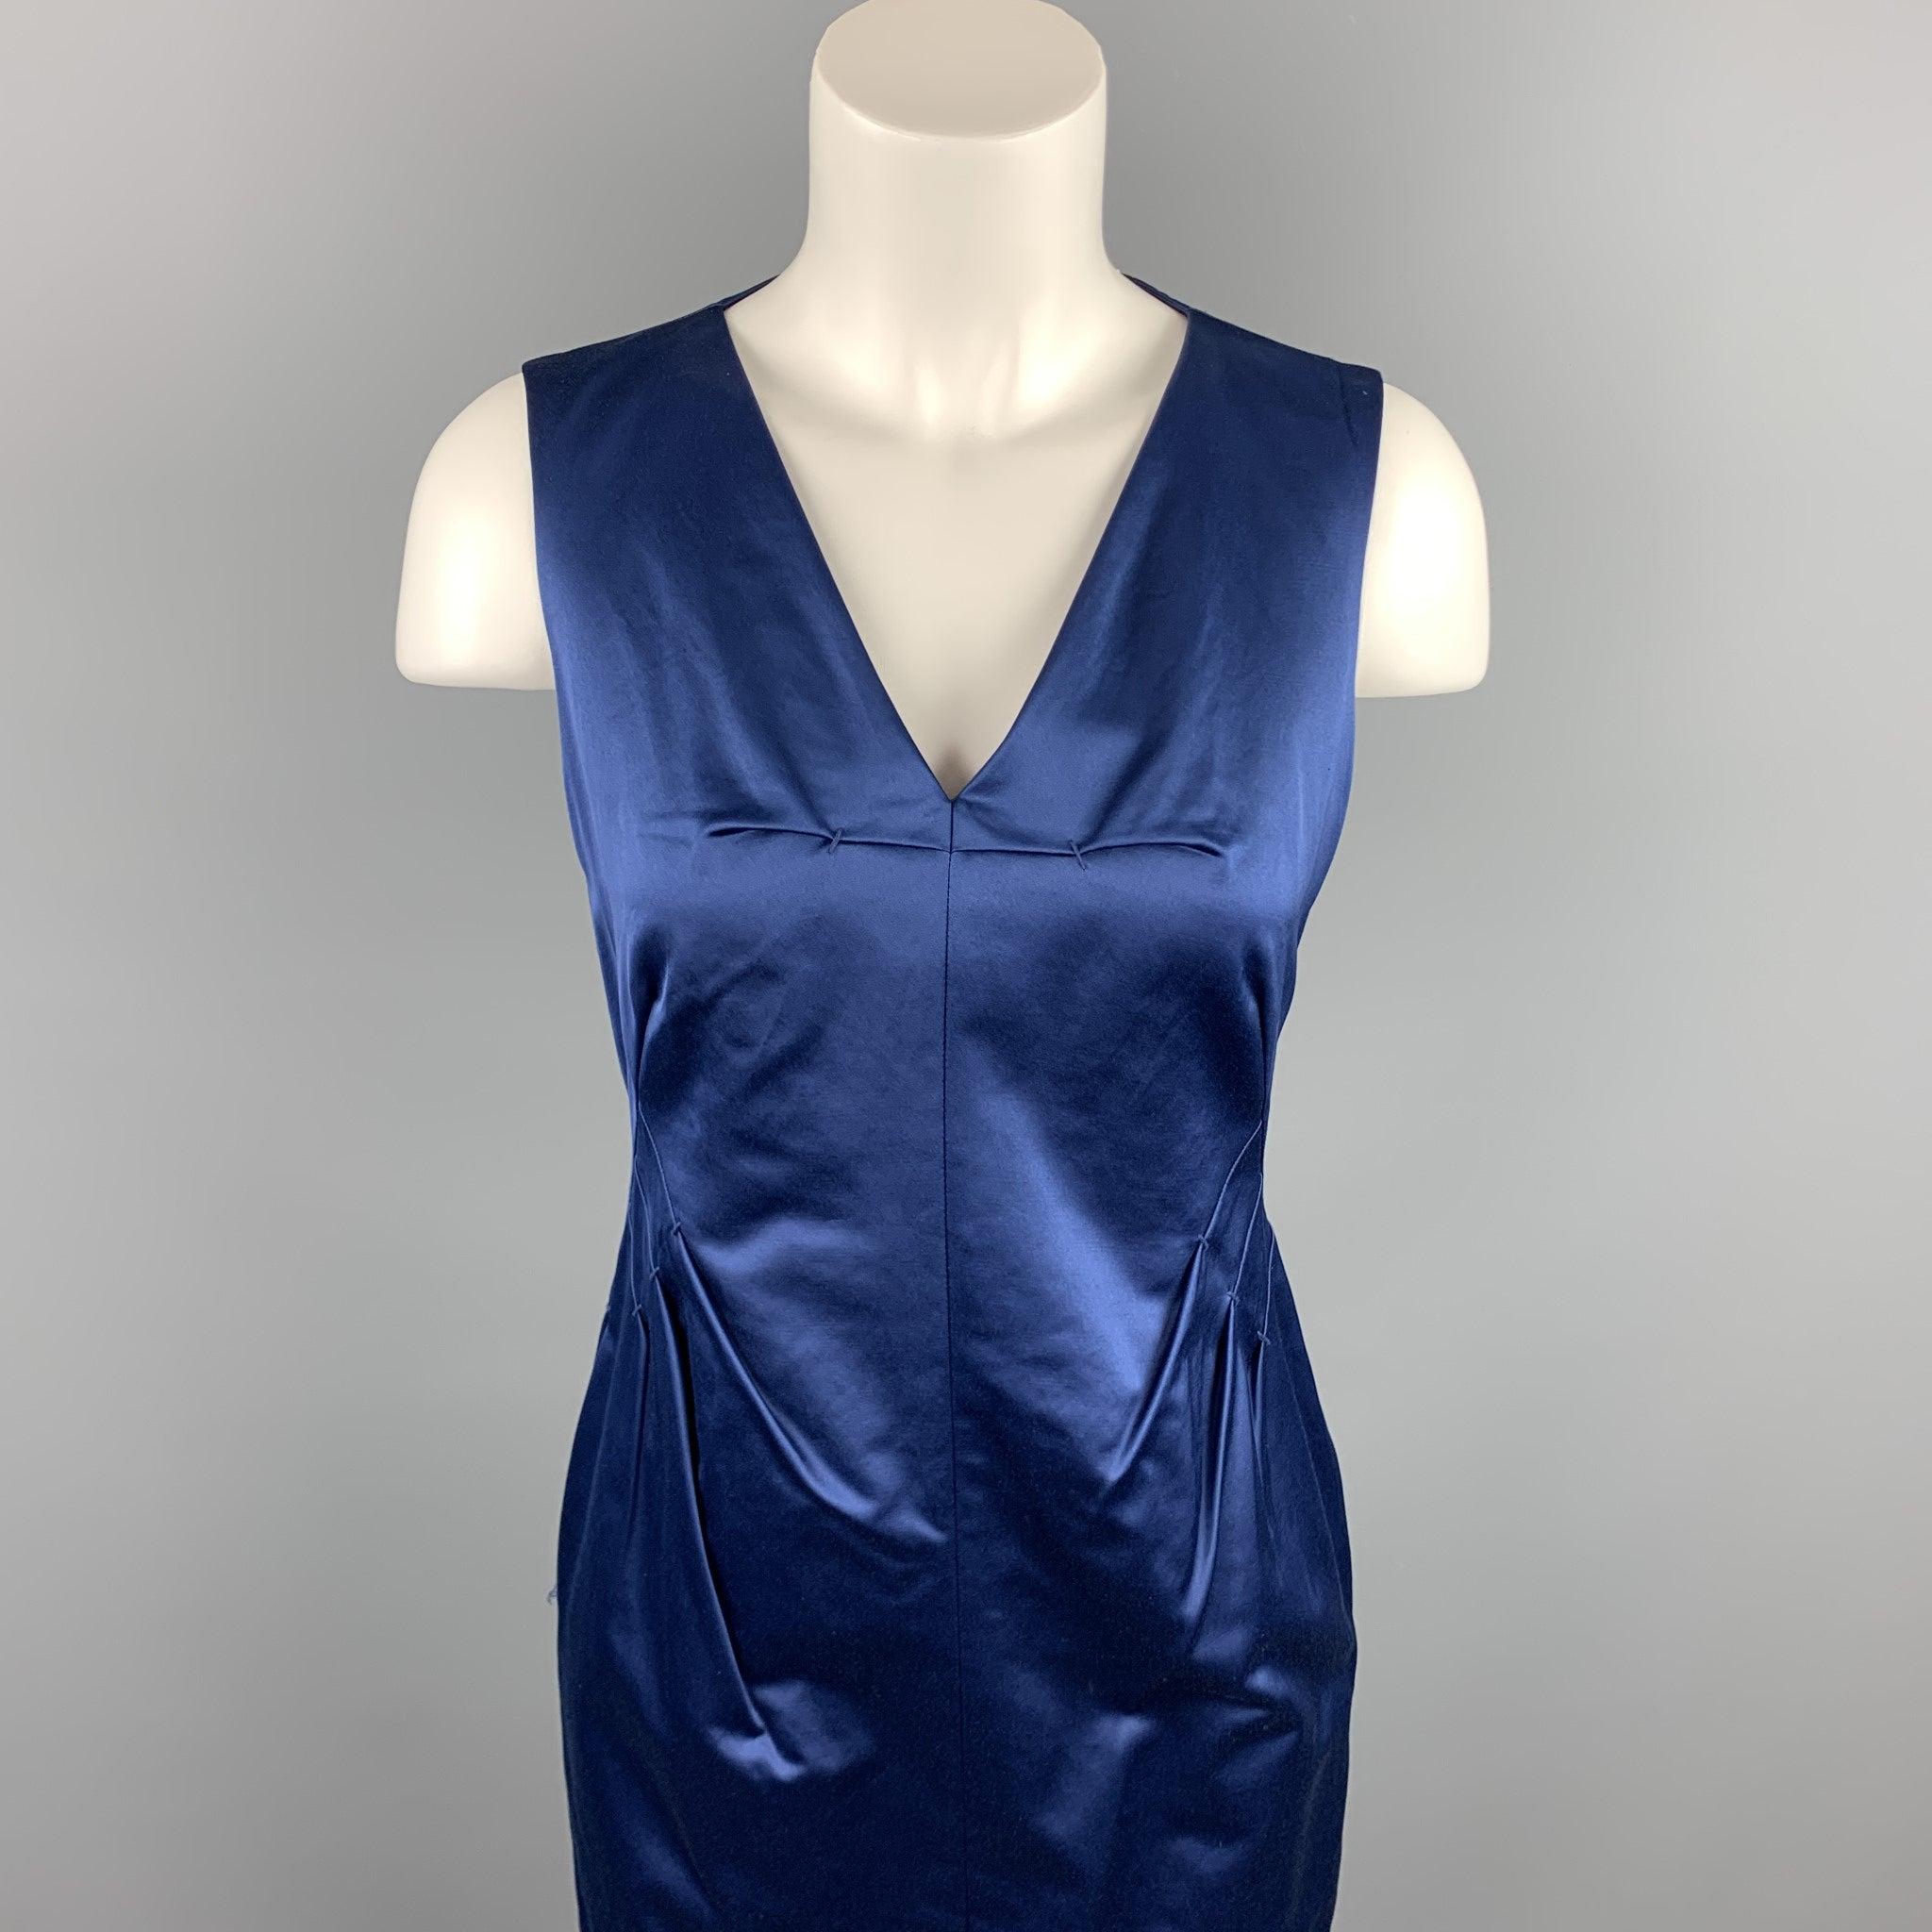 ROBERT RODRIGUEZ cocktail dress comes in a blue cotton / polyester featuring a sheath style, v-neck, slit pockets, pleated details, and a full back zip up closure.
Very Good
Pre-Owned Condition. 

Marked:    

Measurements: 
 
Shoulder: 14 inches